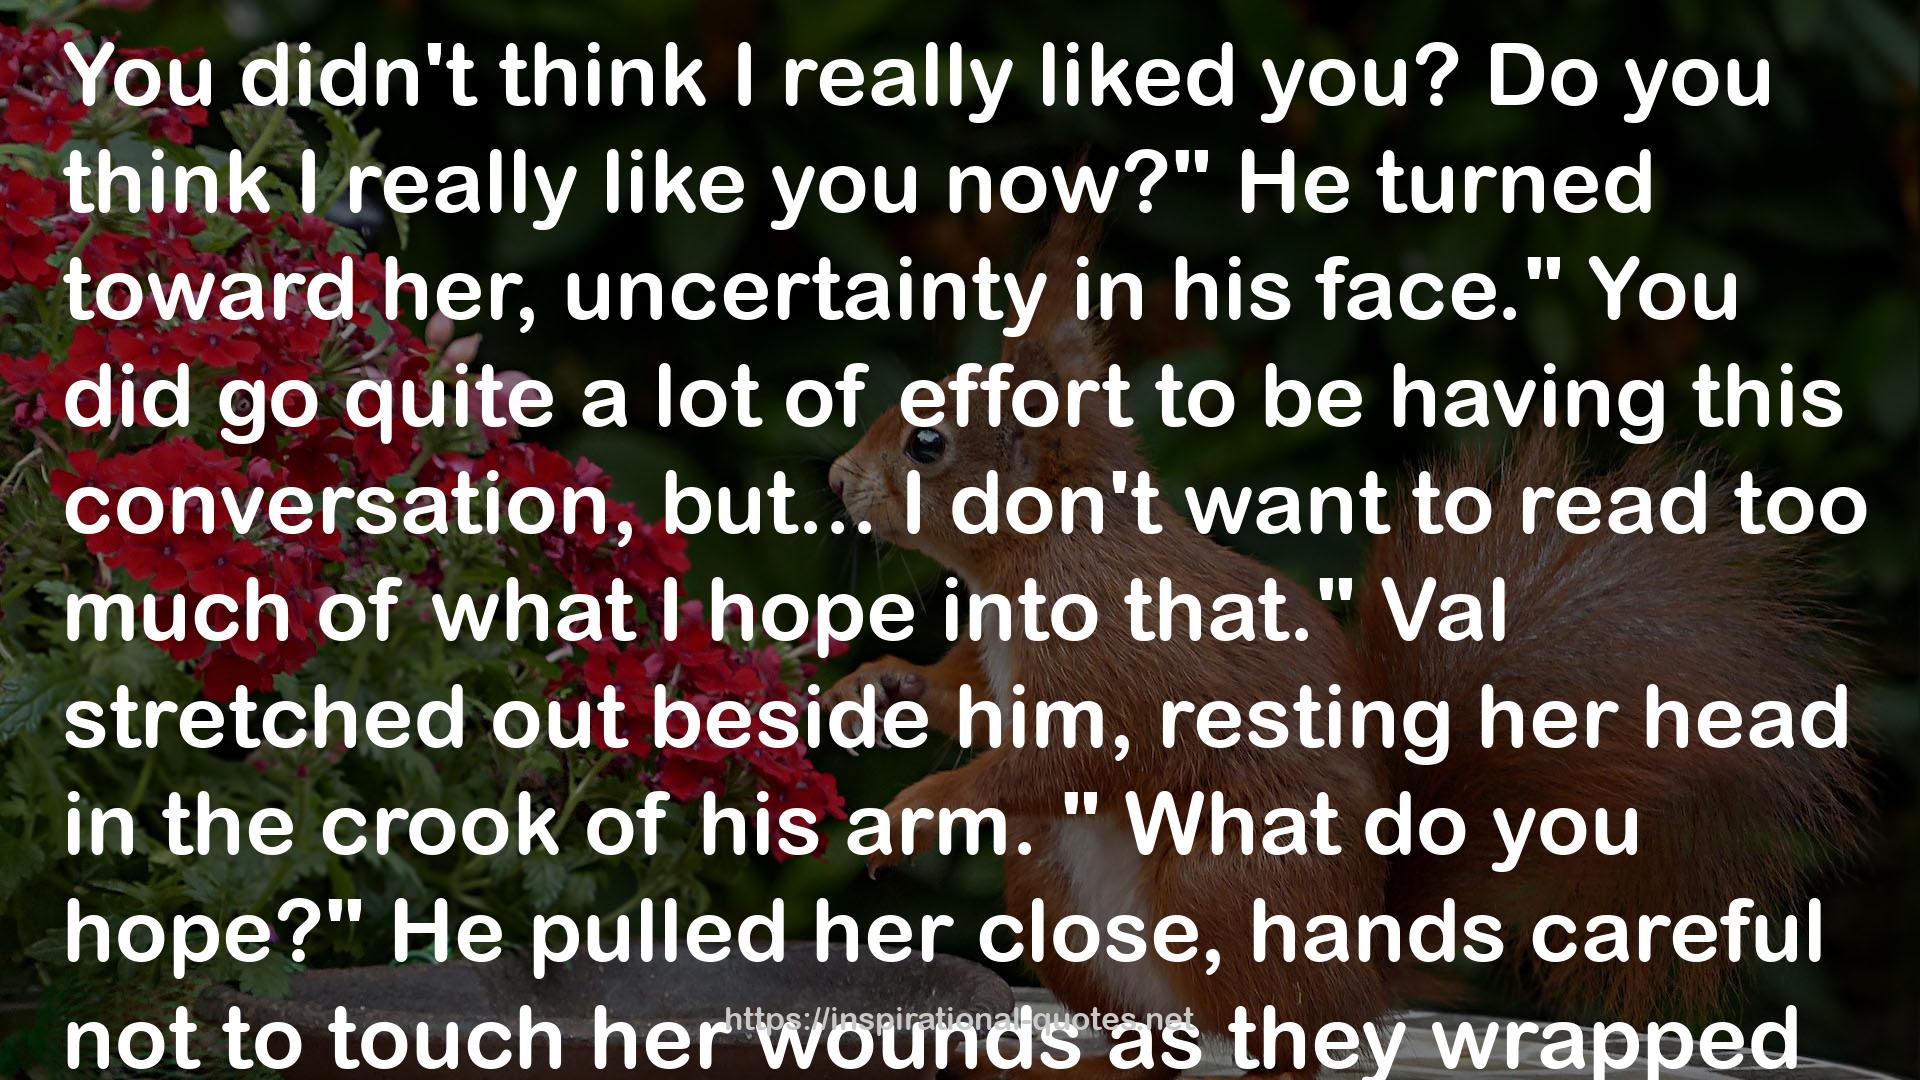 her wounds  QUOTES